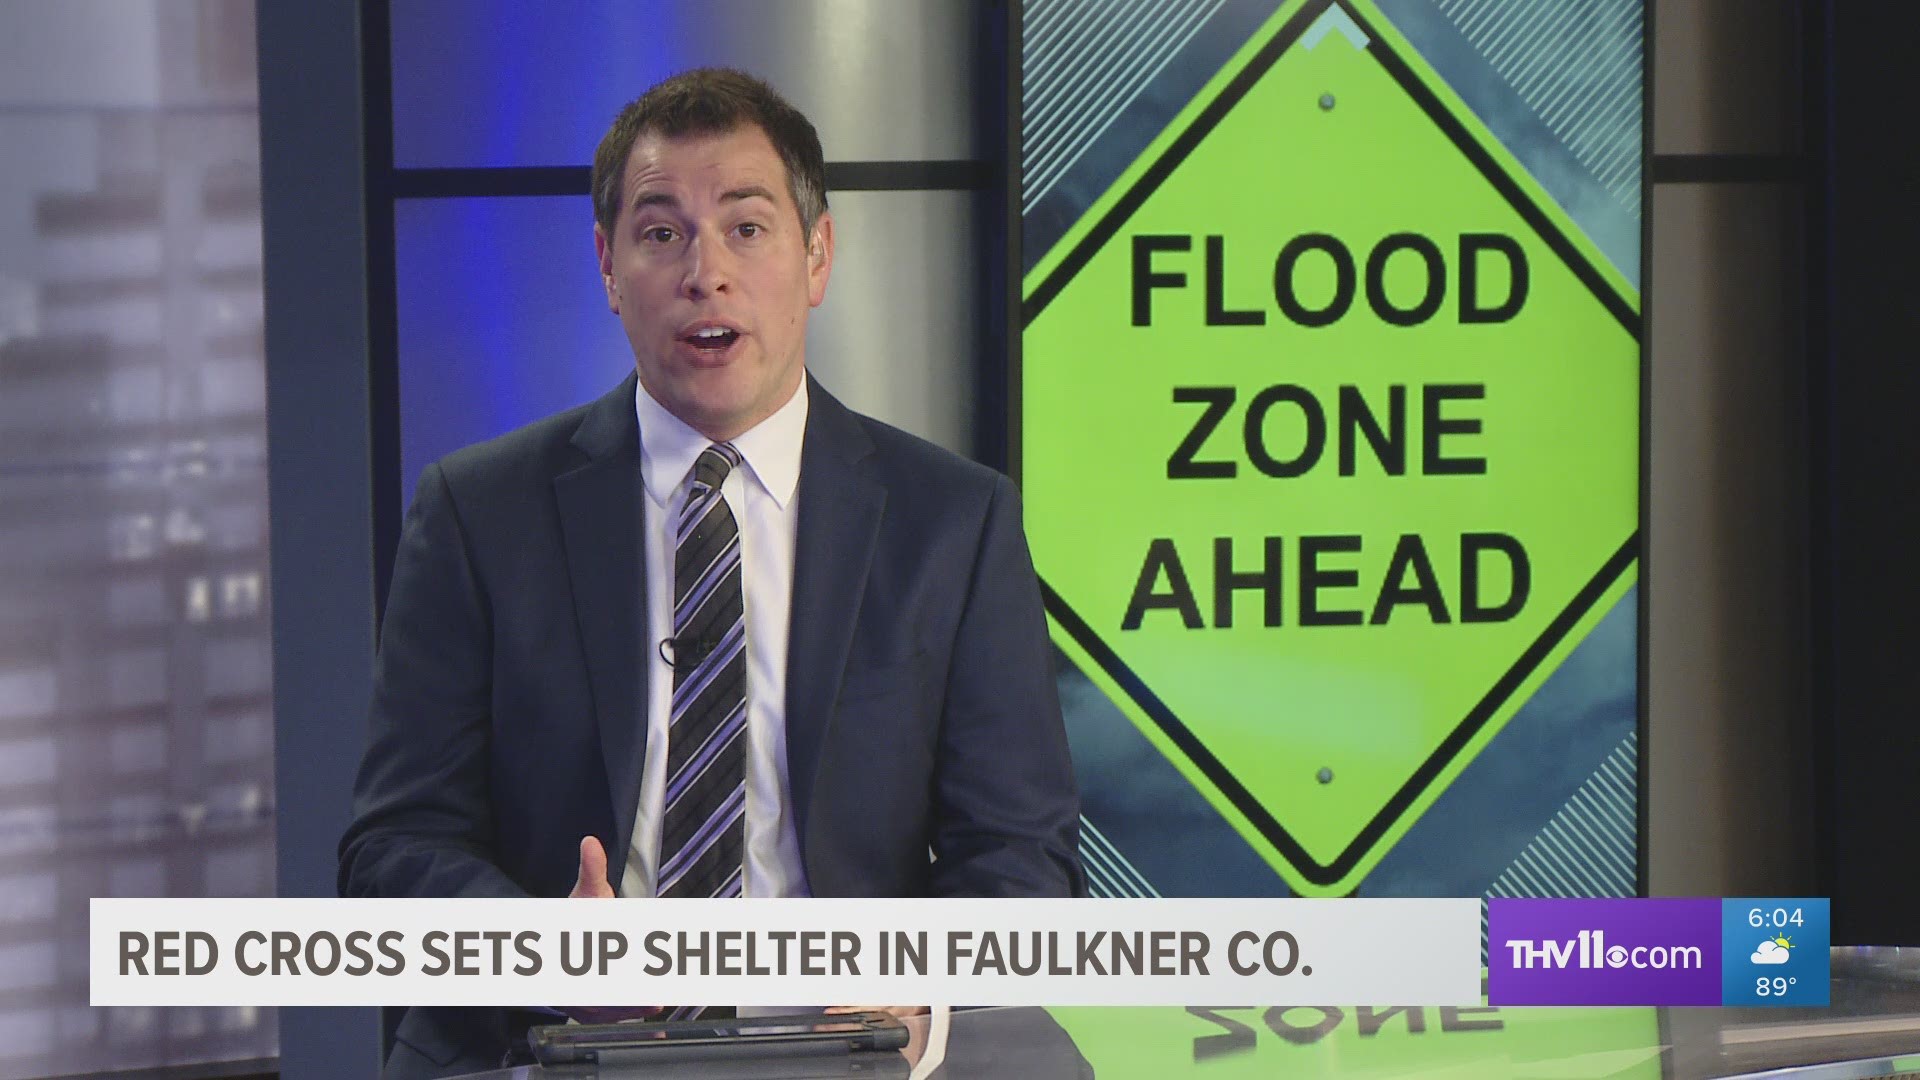 There are no evacuation orders in Faulkner County, but county officials want people who live in areas that flood easily to leave their homes before water levels get too high.